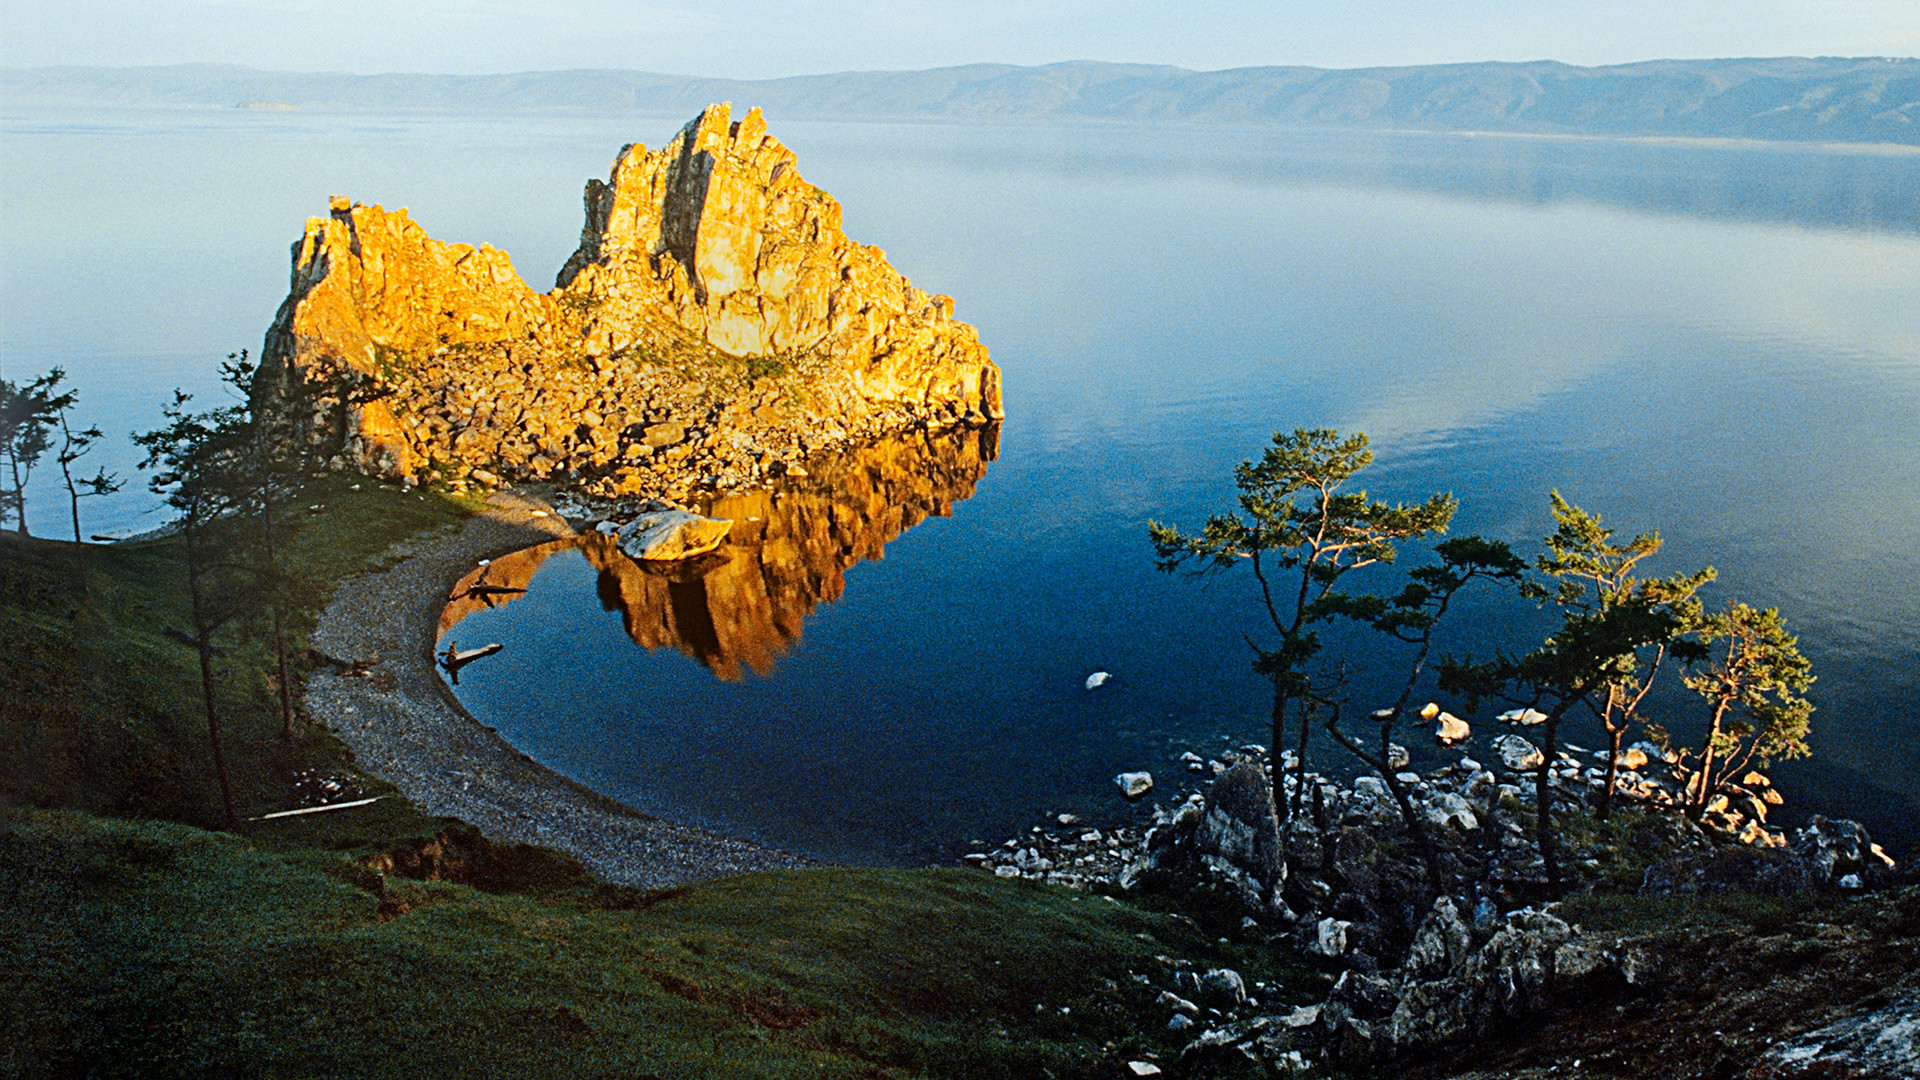 12 archive photos showing the history of Lake Baikal   Russia Beyond